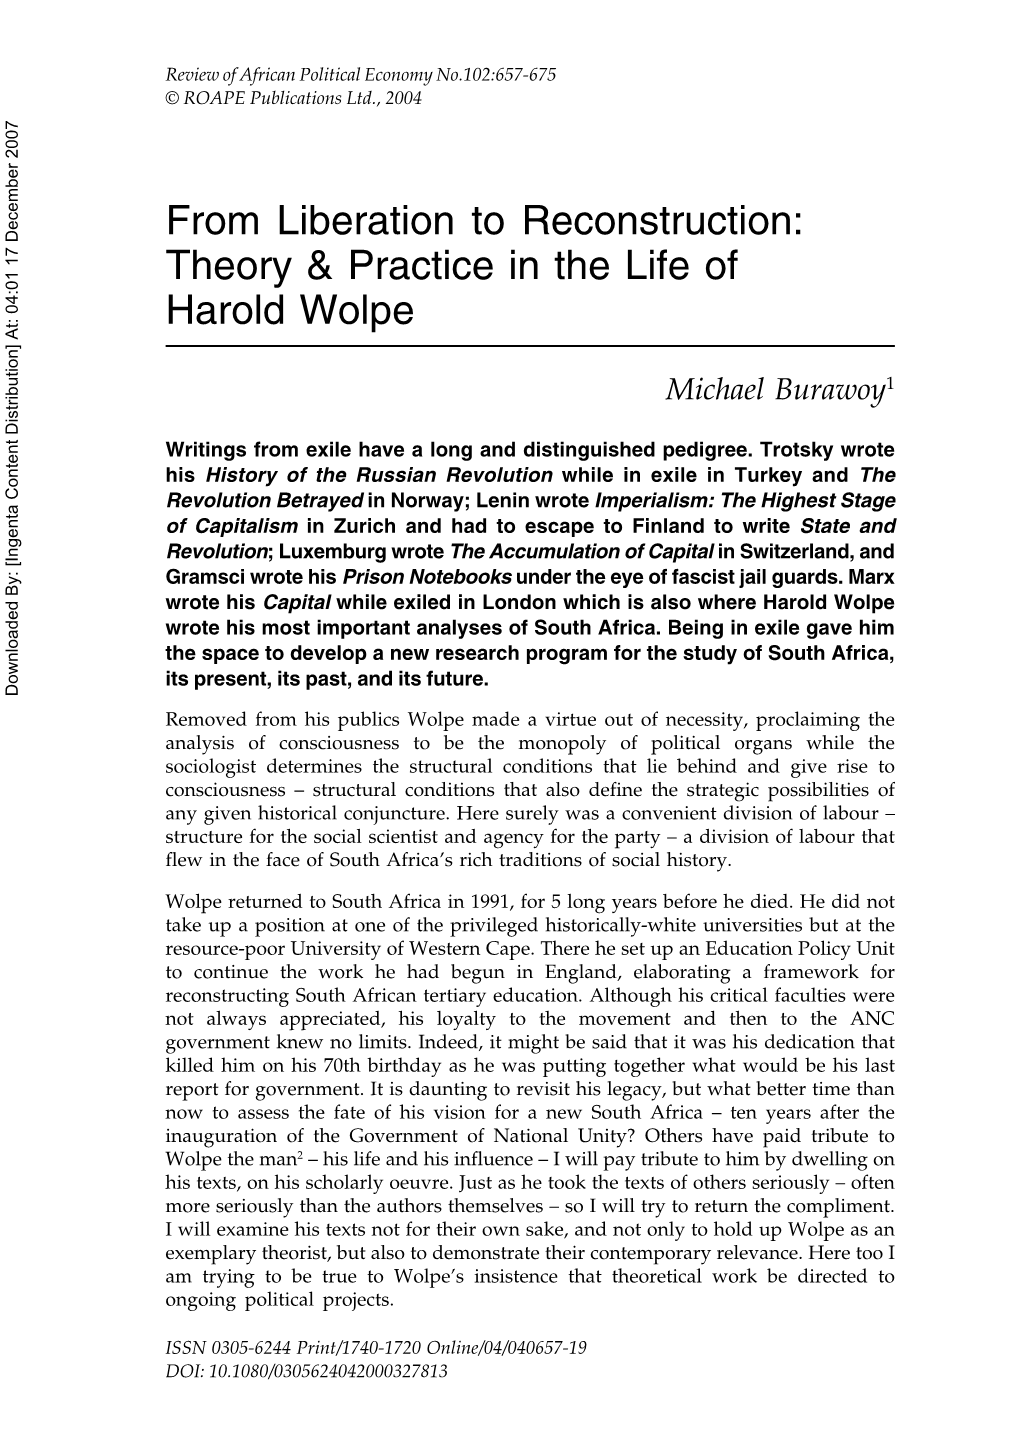 Theory & Practice in the Life of Harold Wolpe